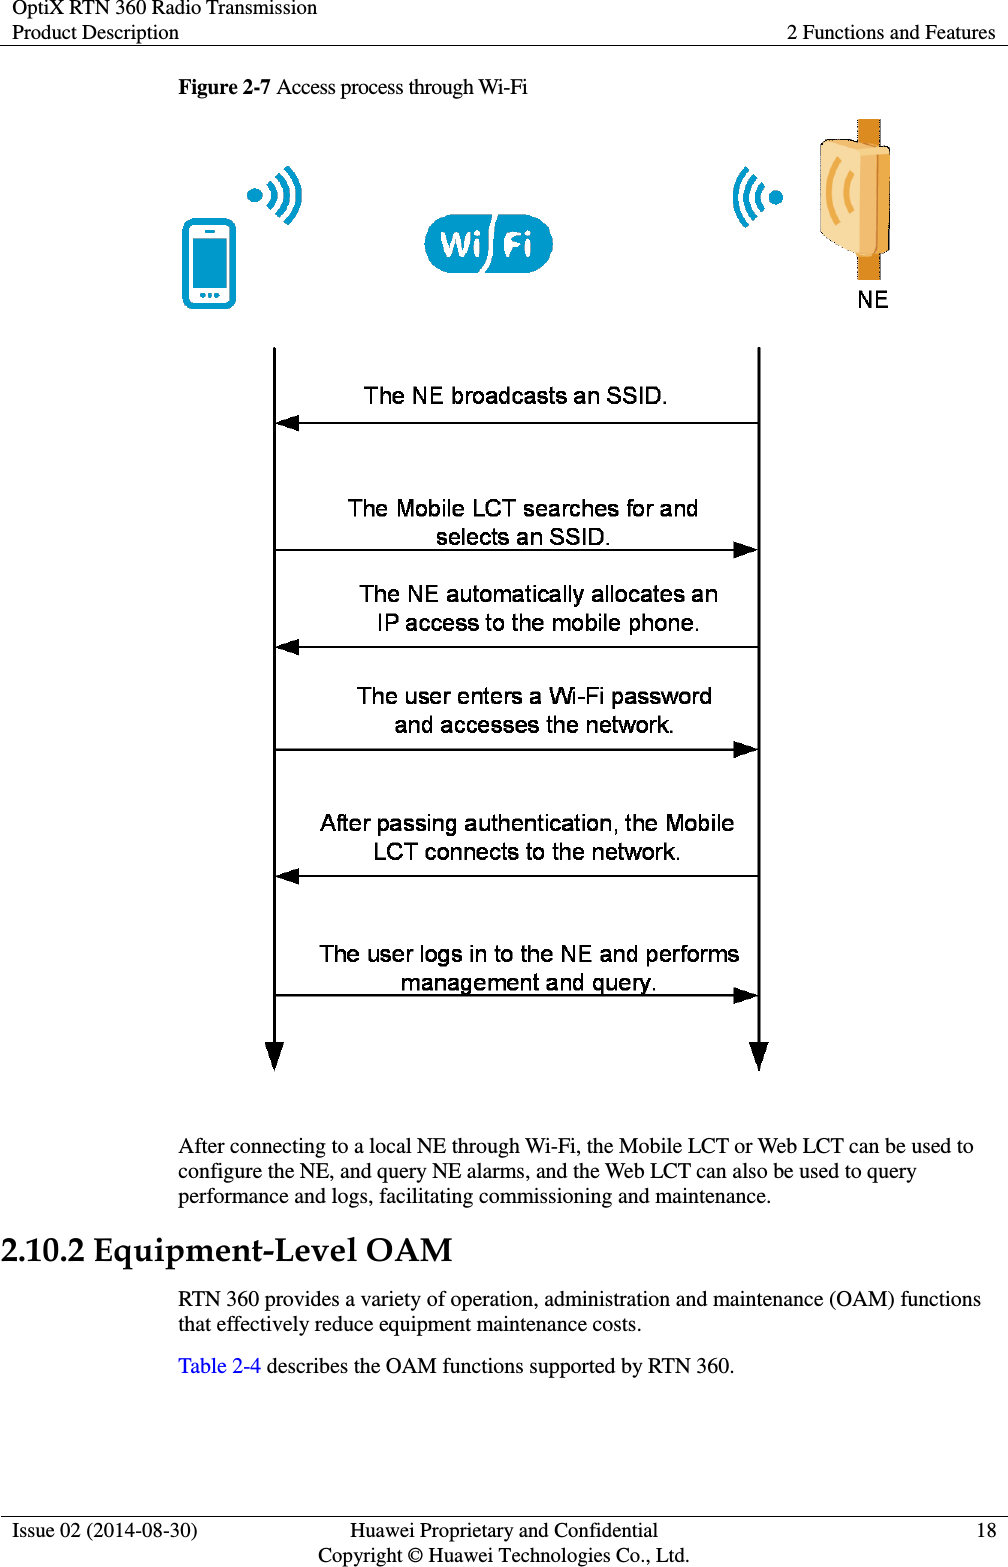 OptiX RTN 360 Radio Transmission Product Description 2 Functions and Features  Issue 02 (2014-08-30) Huawei Proprietary and Confidential                                     Copyright © Huawei Technologies Co., Ltd. 18  Figure 2-7 Access process through Wi-Fi   After connecting to a local NE through Wi-Fi, the Mobile LCT or Web LCT can be used to configure the NE, and query NE alarms, and the Web LCT can also be used to query performance and logs, facilitating commissioning and maintenance. 2.10.2 Equipment-Level OAM RTN 360 provides a variety of operation, administration and maintenance (OAM) functions that effectively reduce equipment maintenance costs.   Table 2-4 describes the OAM functions supported by RTN 360. 